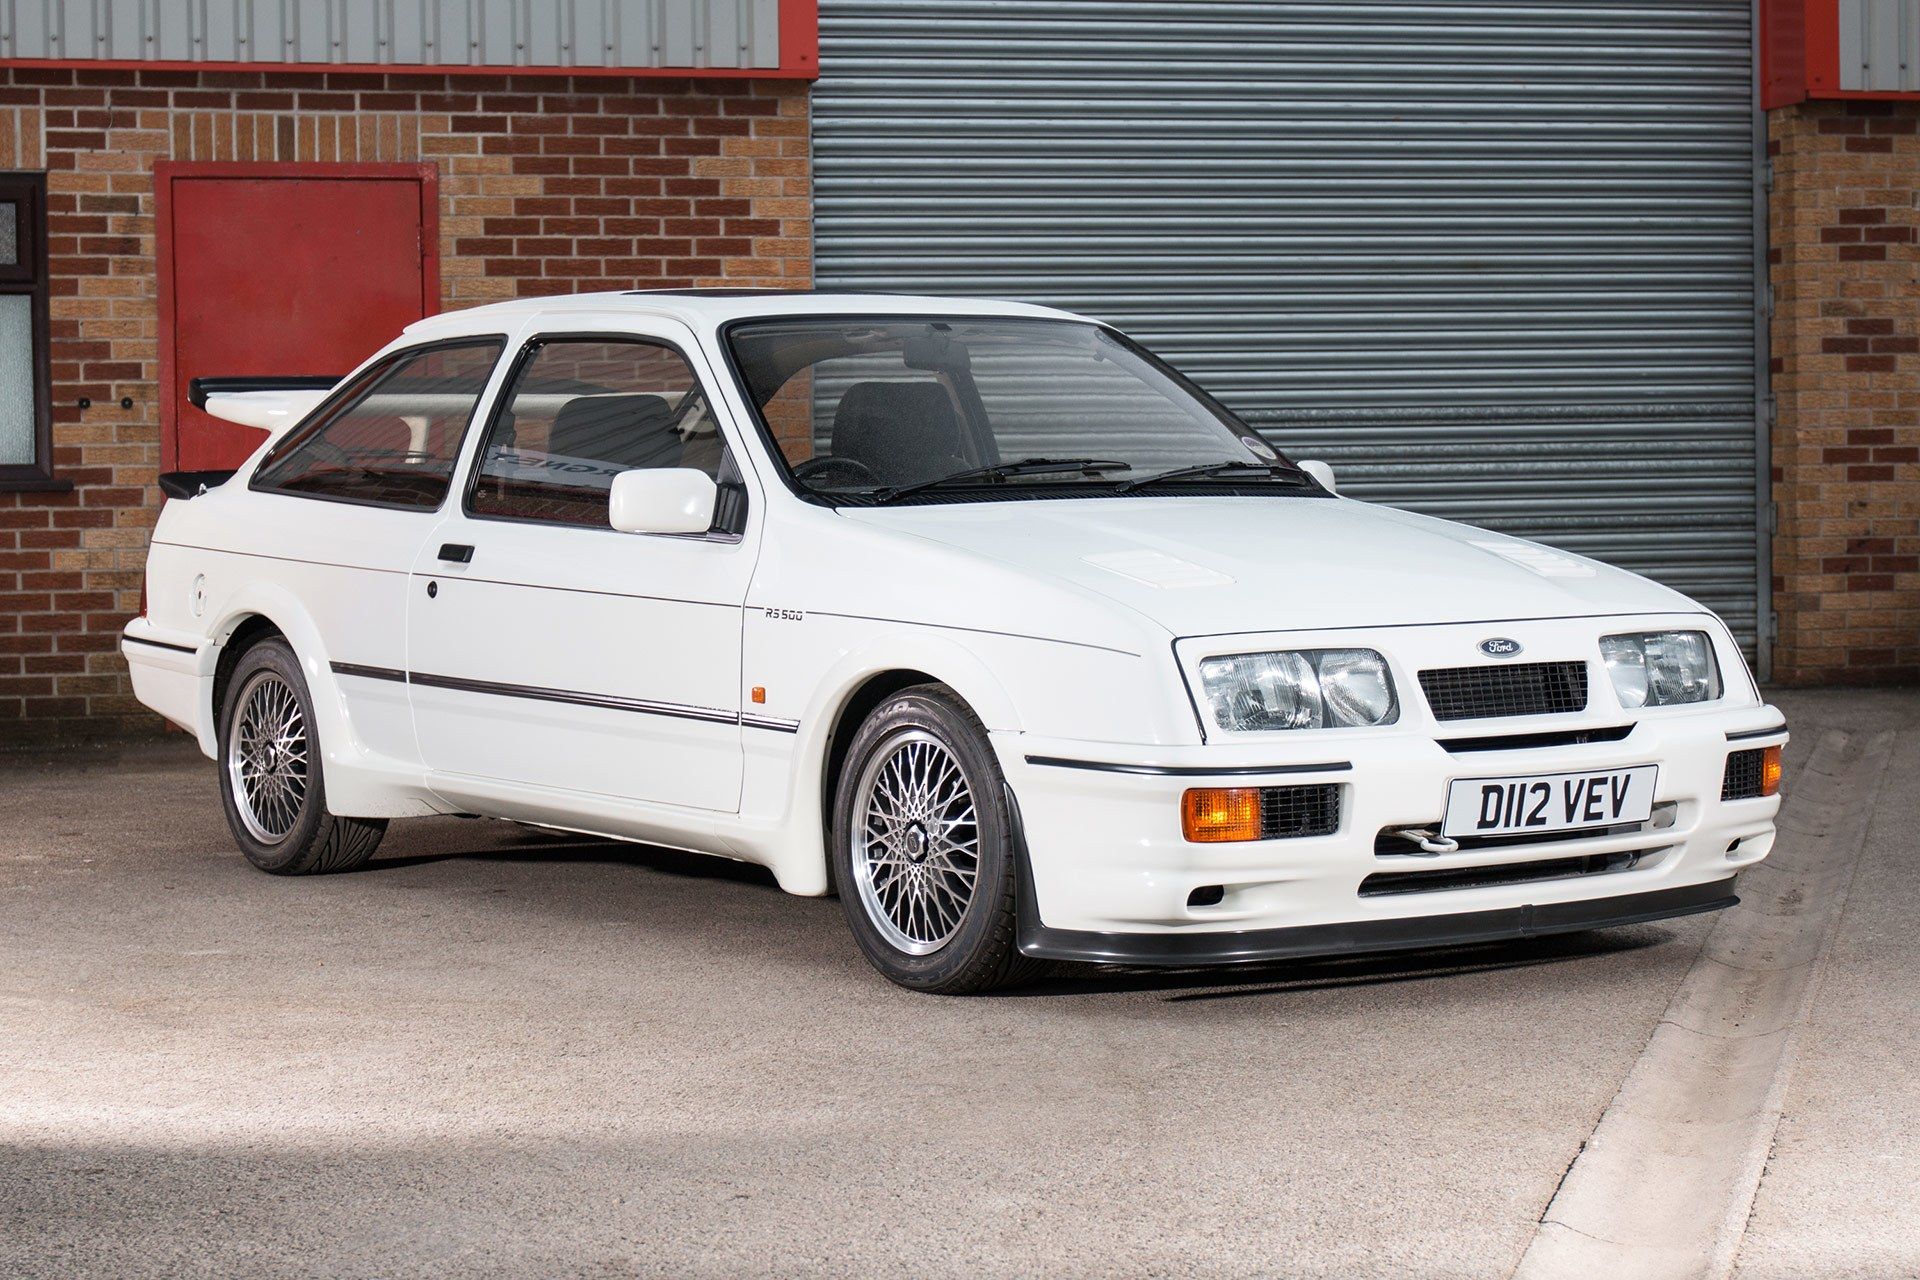 1985 Ford Sierra RS Cosworth